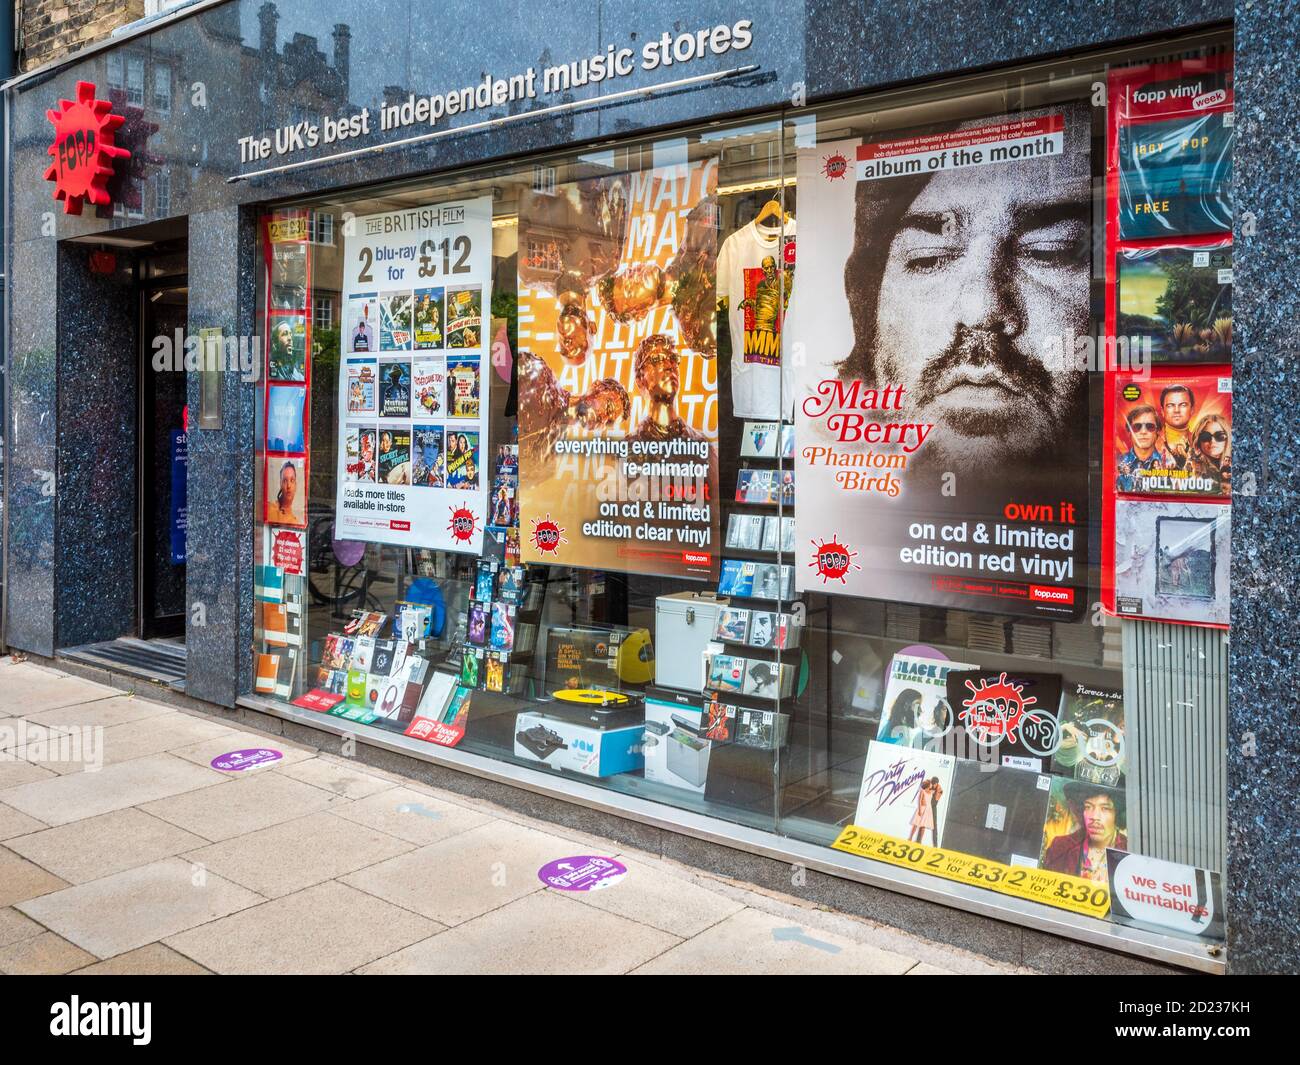 Fopp Store Cambridge - Fopp Independent Music Stores sell music, film, books and other entertainment products, Owned by HMV, founded 1981 in Glasgow. Stock Photo